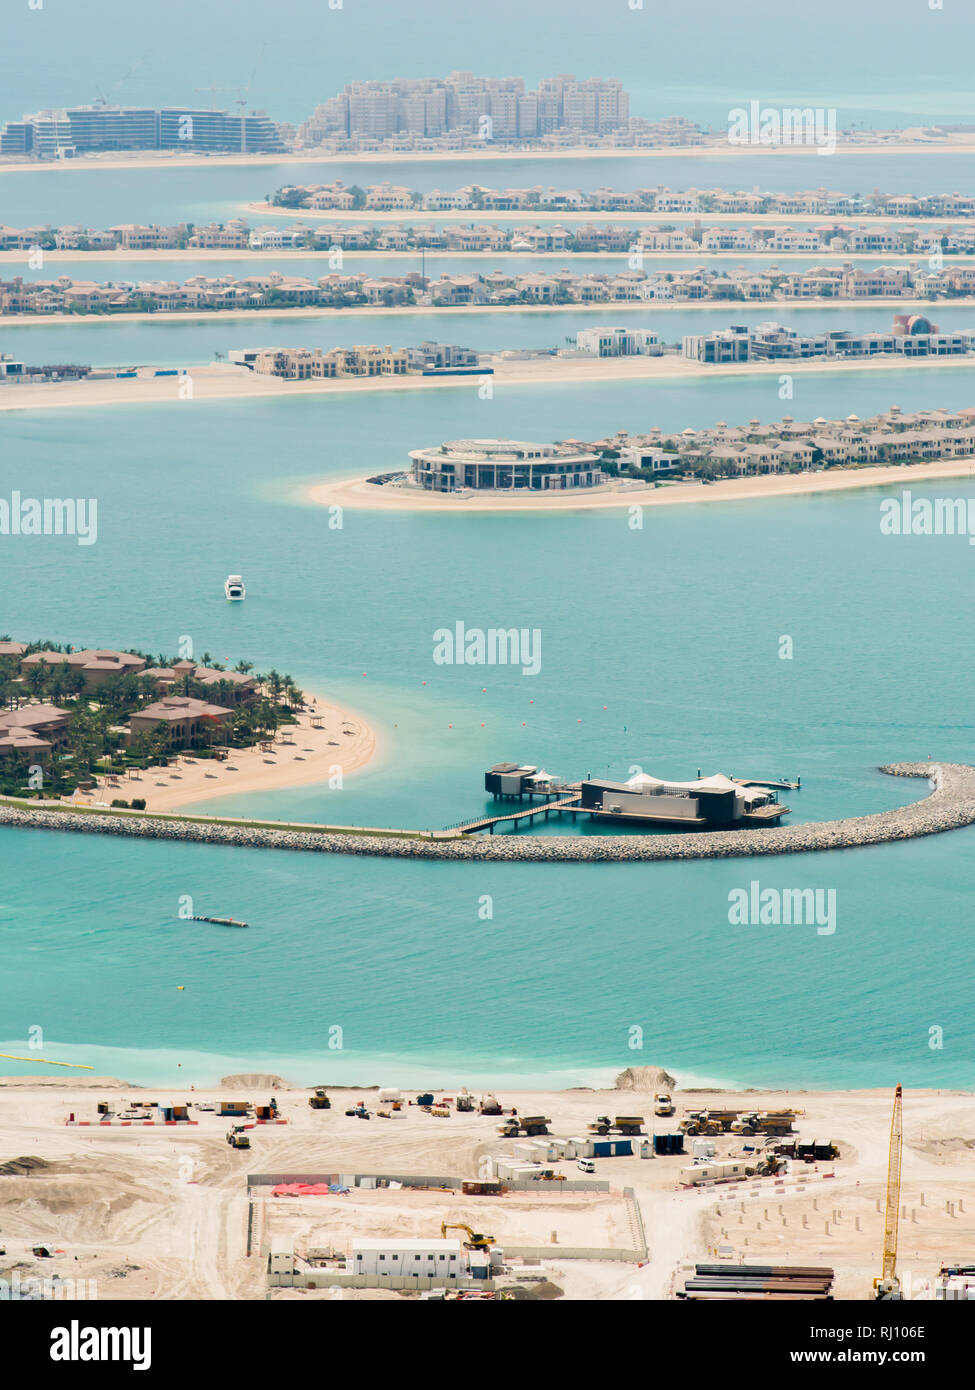 View on residential buildings on Palm Jumeirah island. The Palm Jumeirah is an artificial archipelago in Dubai emirate. Stock Photo